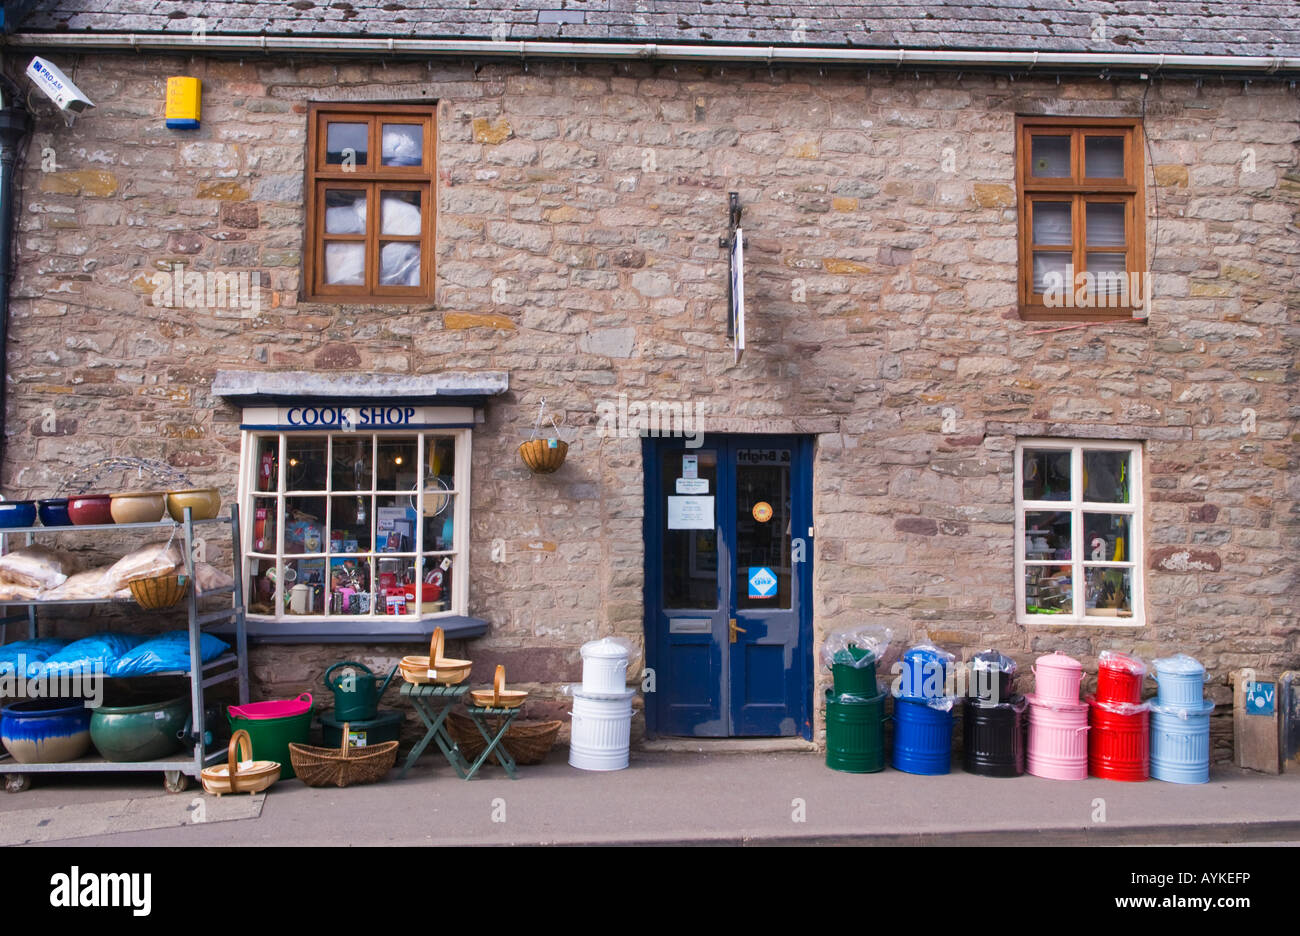 Cook Shop in town of Hay on Wye Powys Wales UK EU Stock Photo